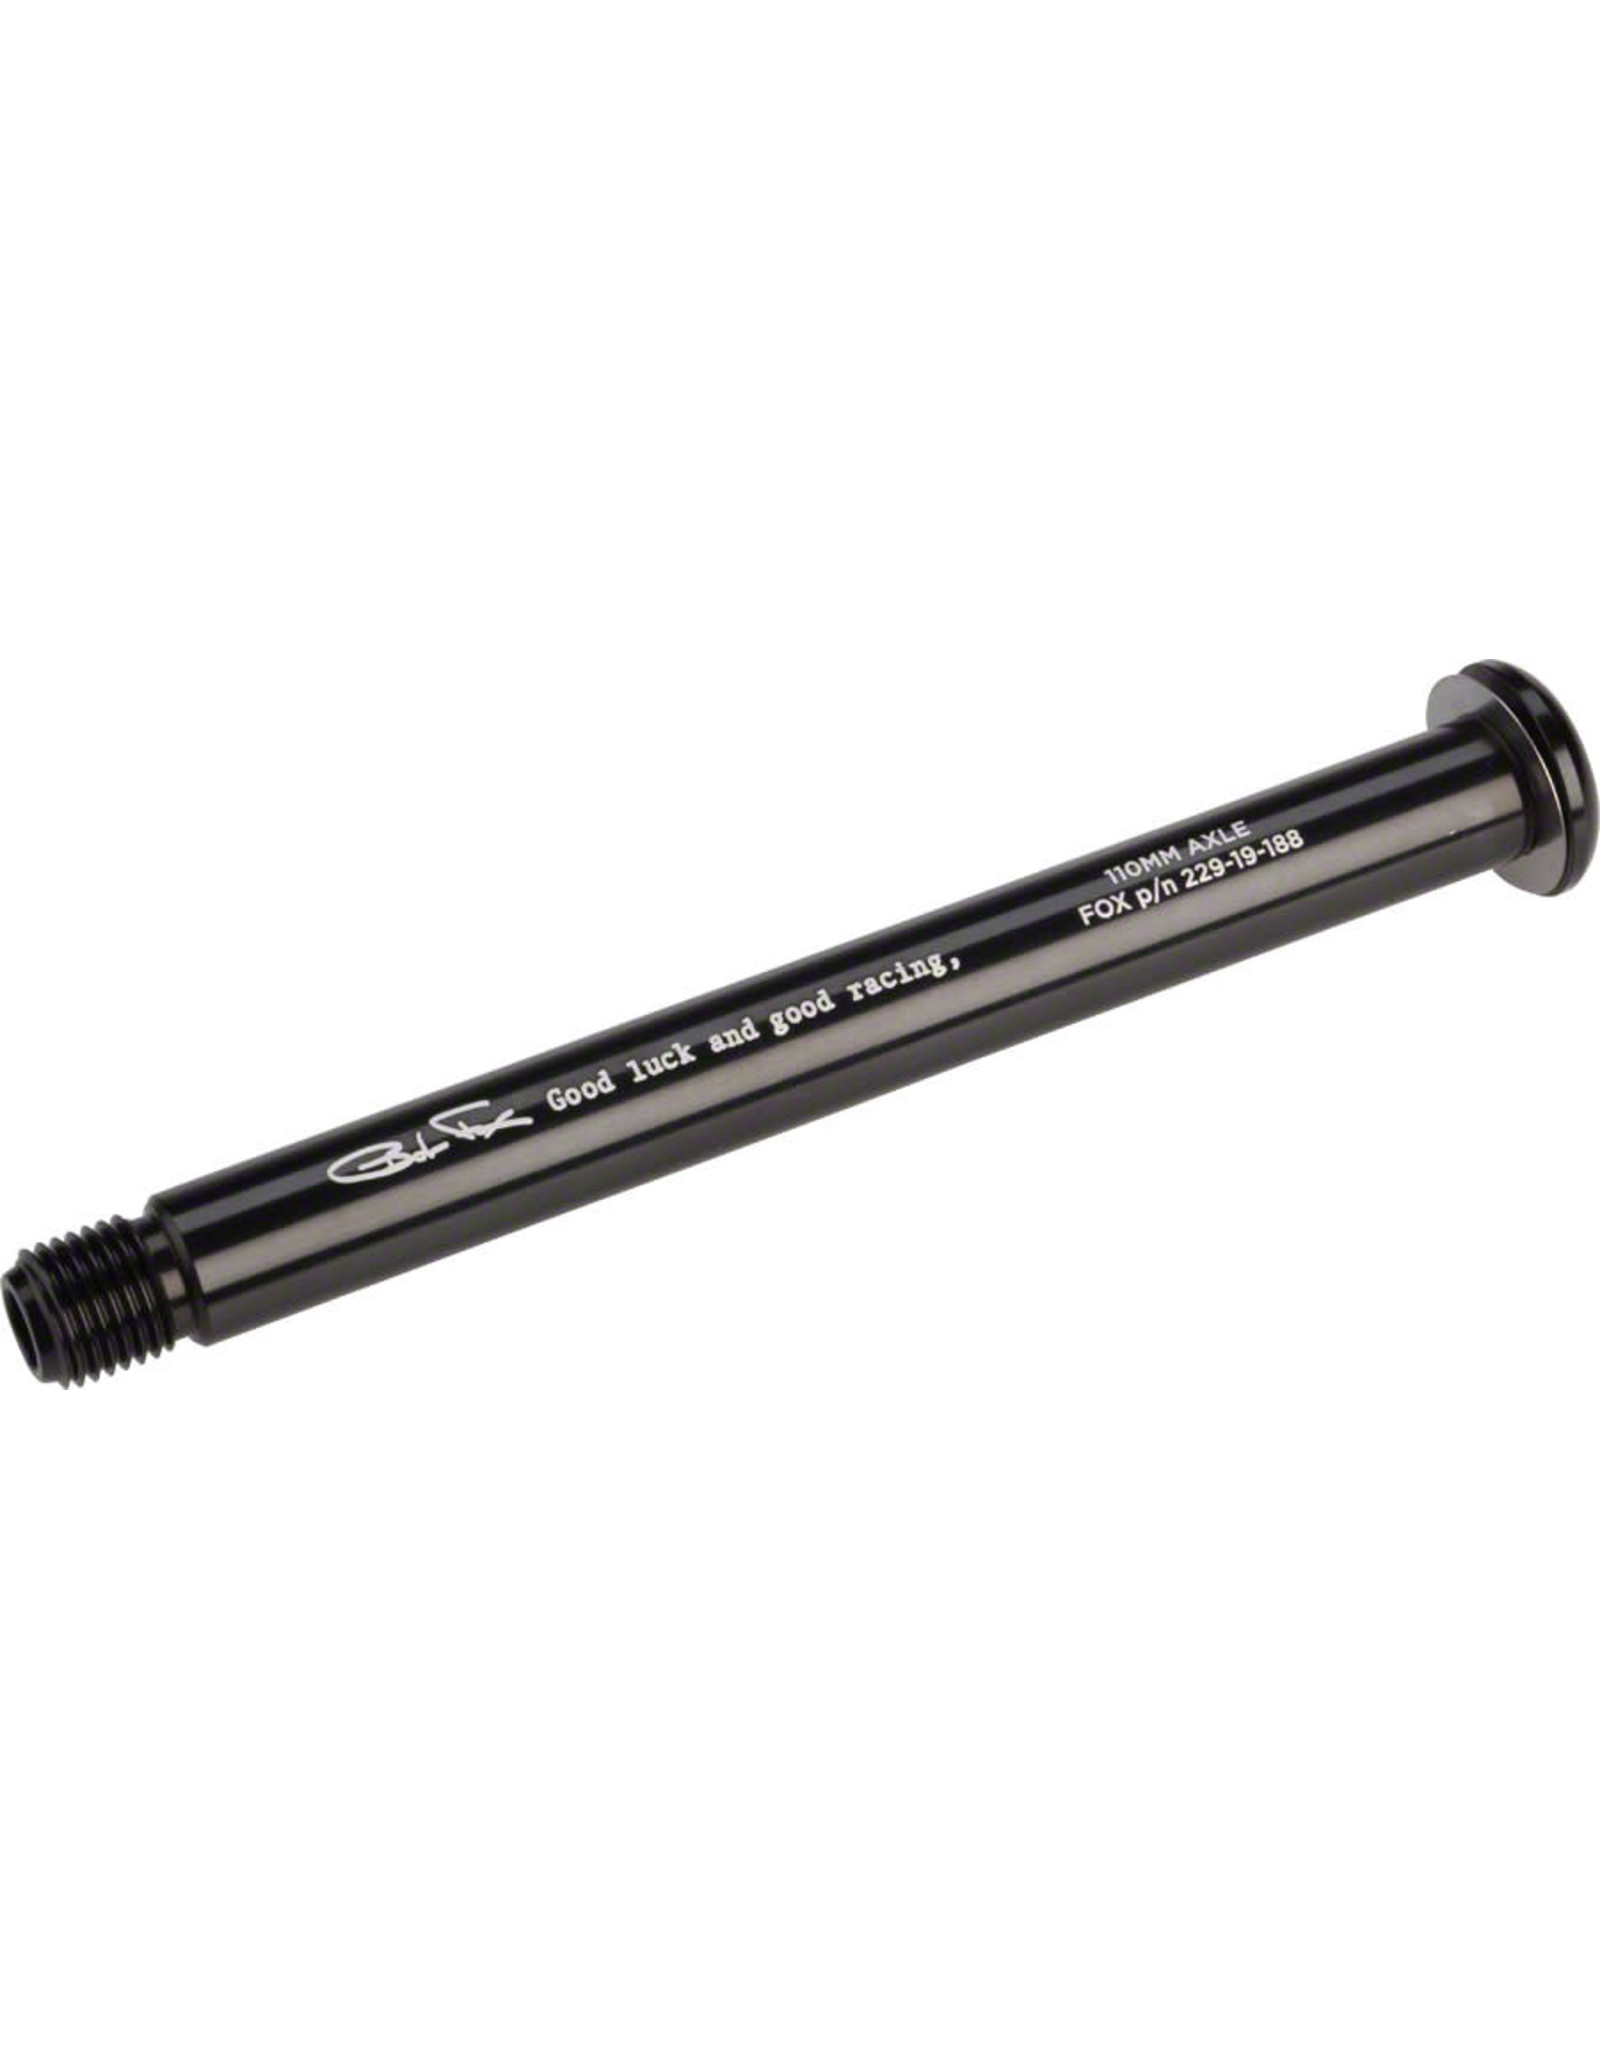 FOX FOX Kabolt Axle Assembly, Black, for 15x110mm "Boost" Forks